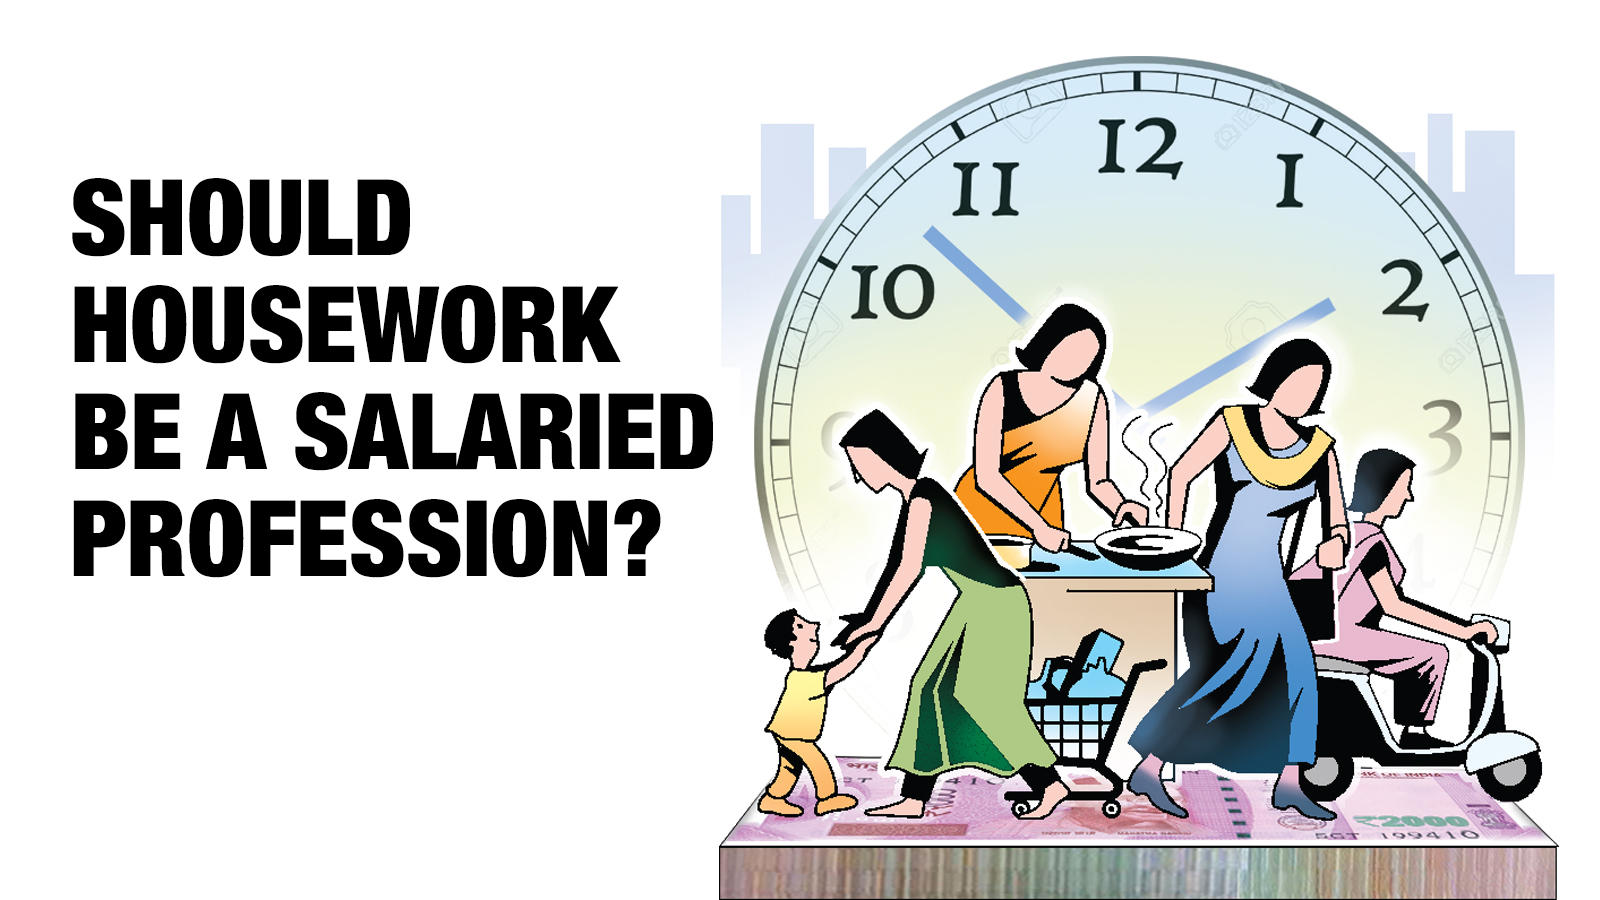 Should housework be a salaried profession? | India News - Times of India